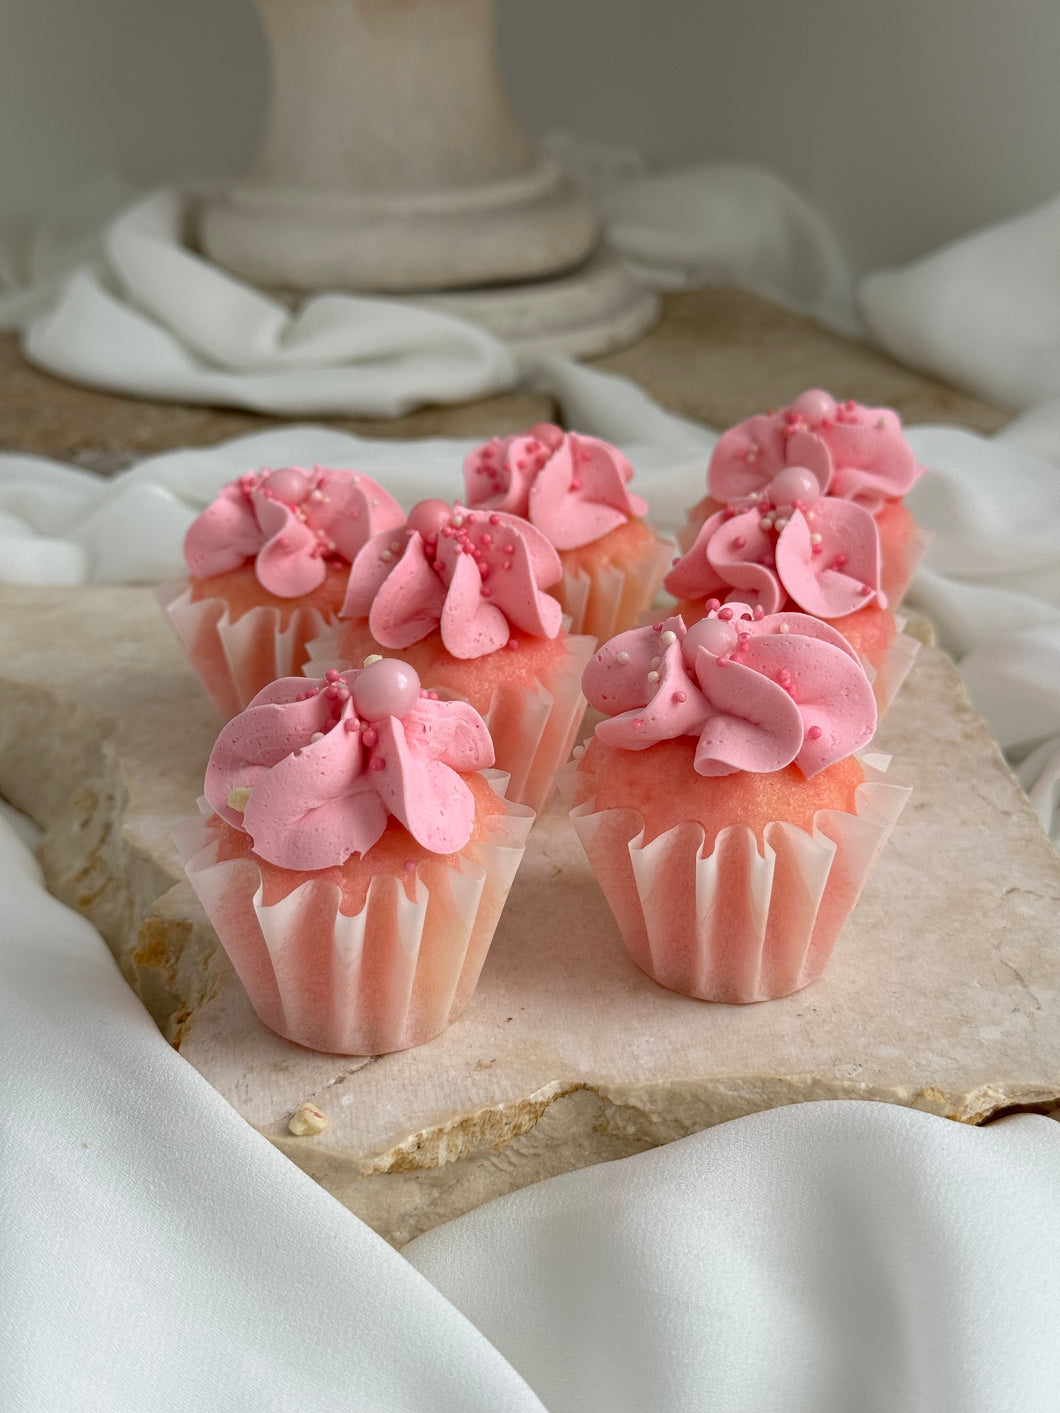 12 x MINI Cupcakes | Pretty in Pink | Gift Boxed